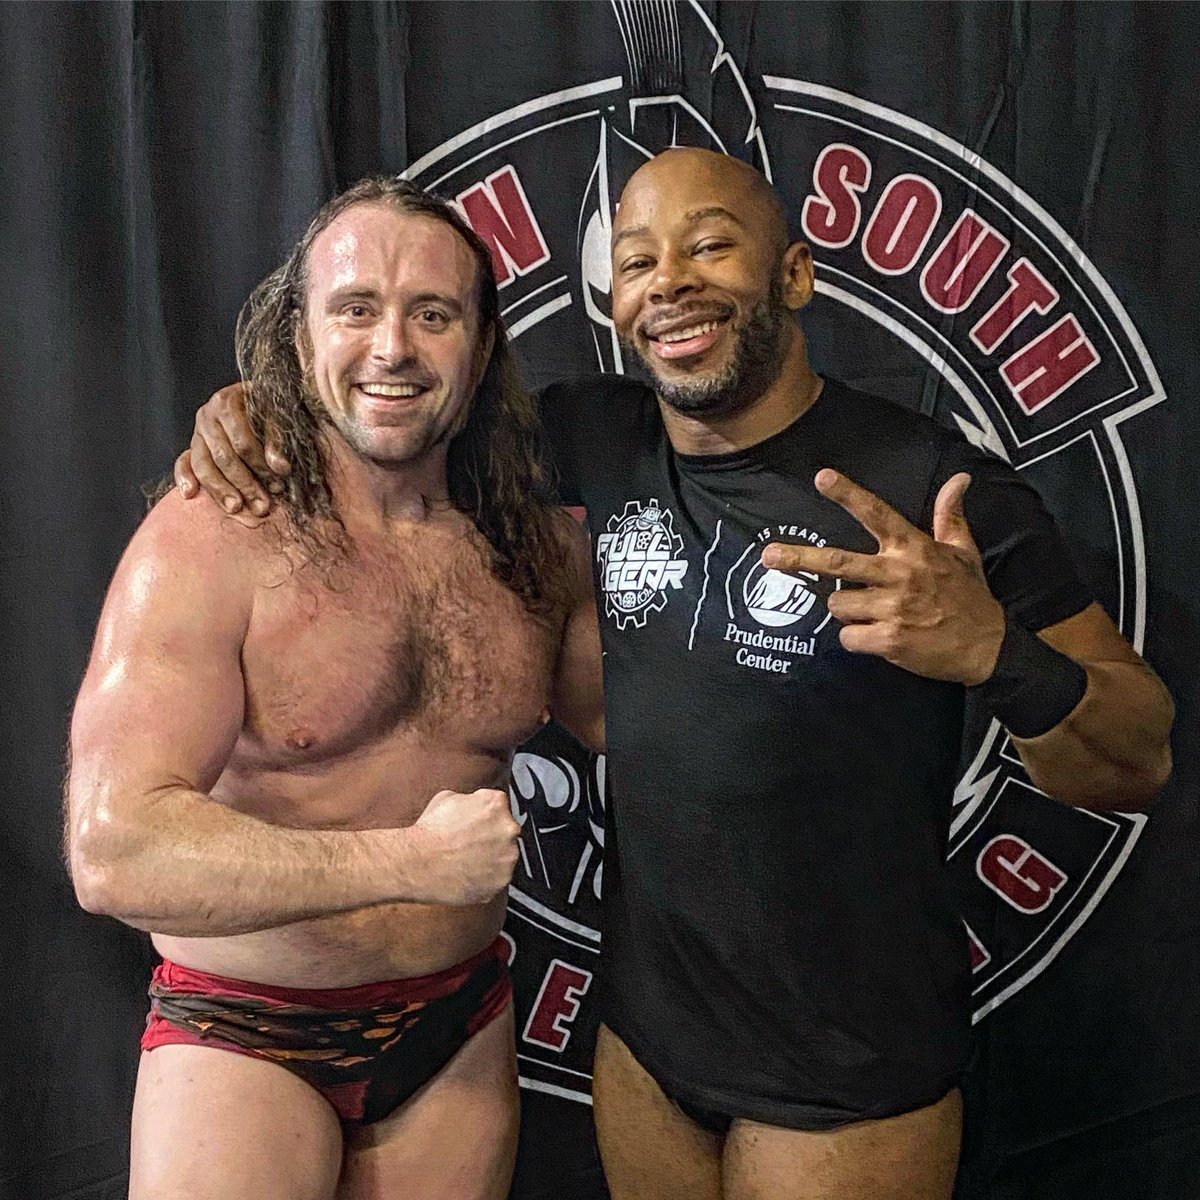 After my victory at @NewSouthKY I had to get a photo with one of the best to ever do it, @TheLethalJay 

Legit one of the best on the planet right now.

#jaylethal #lethalinjection #professionalwrestling #newsouthwrestling #allelitewrestling